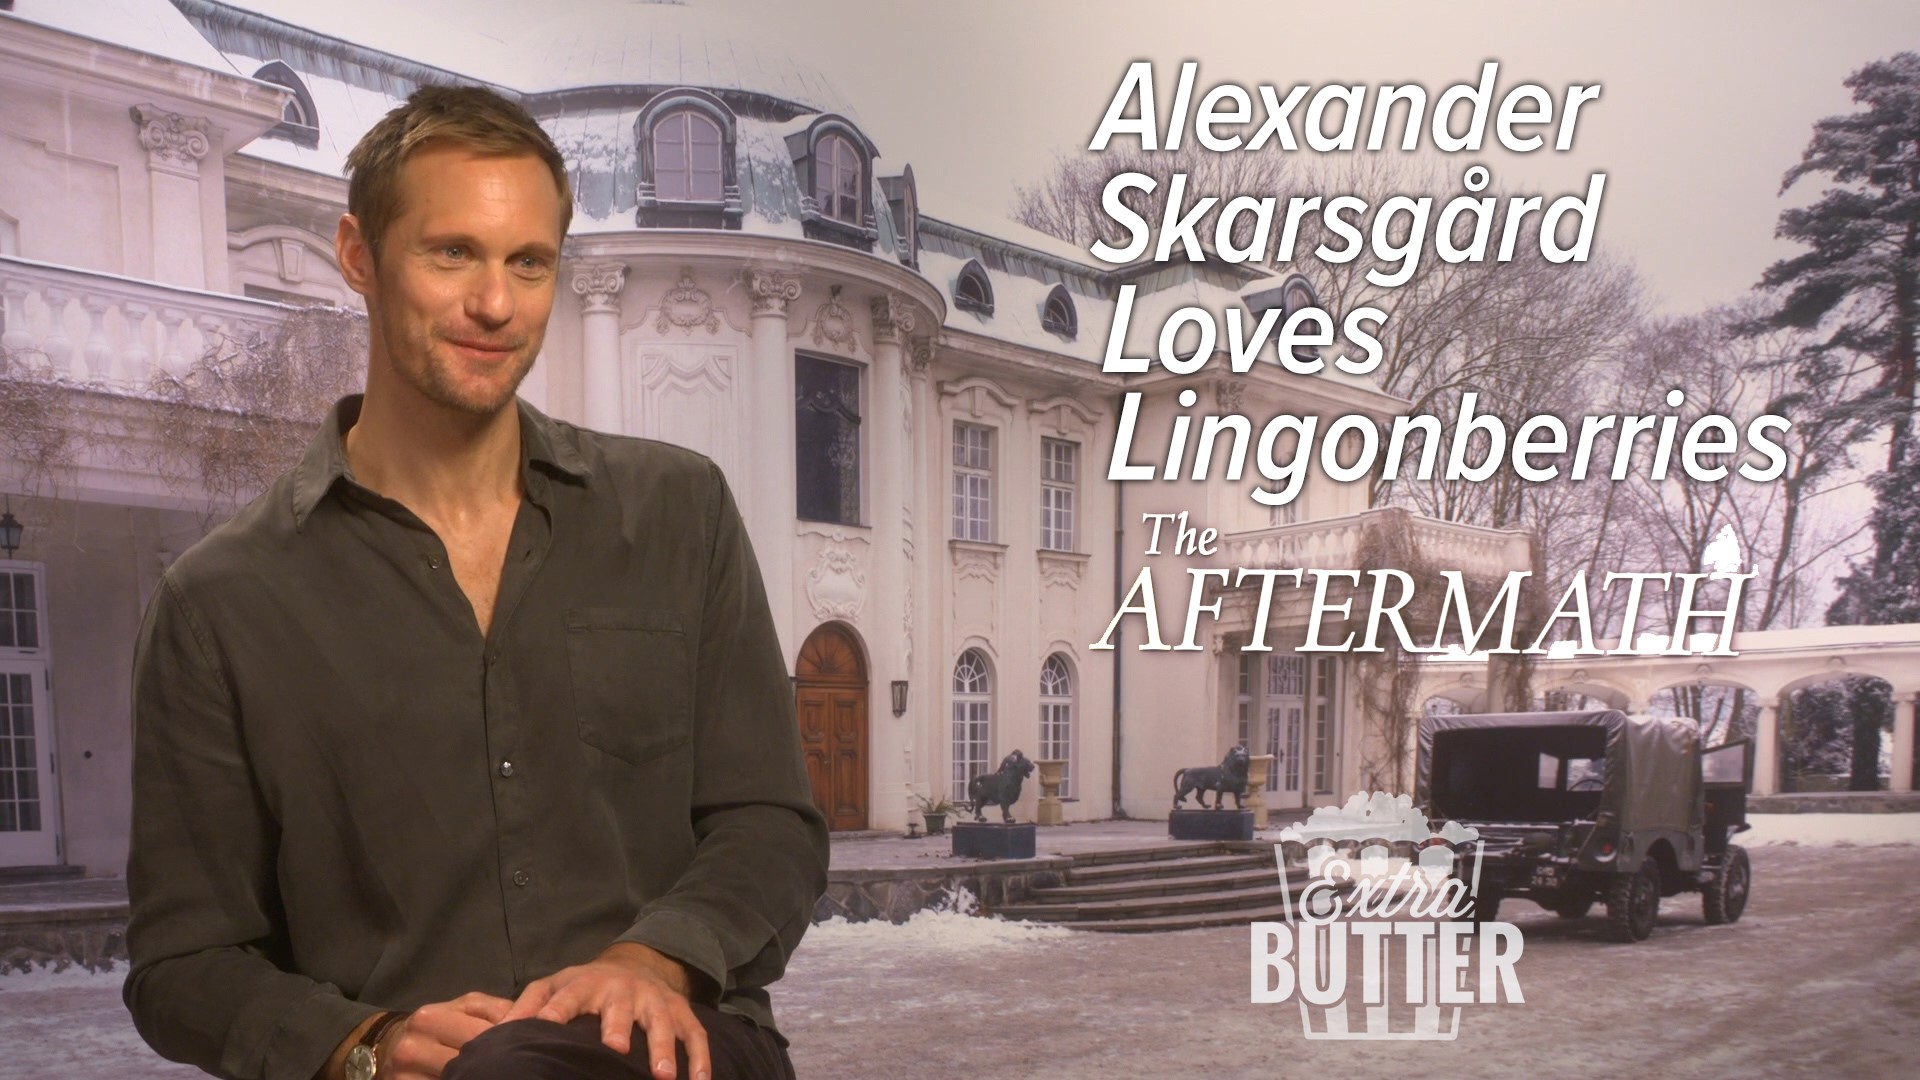 Answering what could be a cringe-worthy question, Alexander Skarsgard explains his love for lingonberry. He even puts it in his meatballs. Mark S. Allen also asks about his new movie, 'The Aftermath' and his steamy scenes with Keira Knightley. Interview arranged Fox Searchlight Pictures